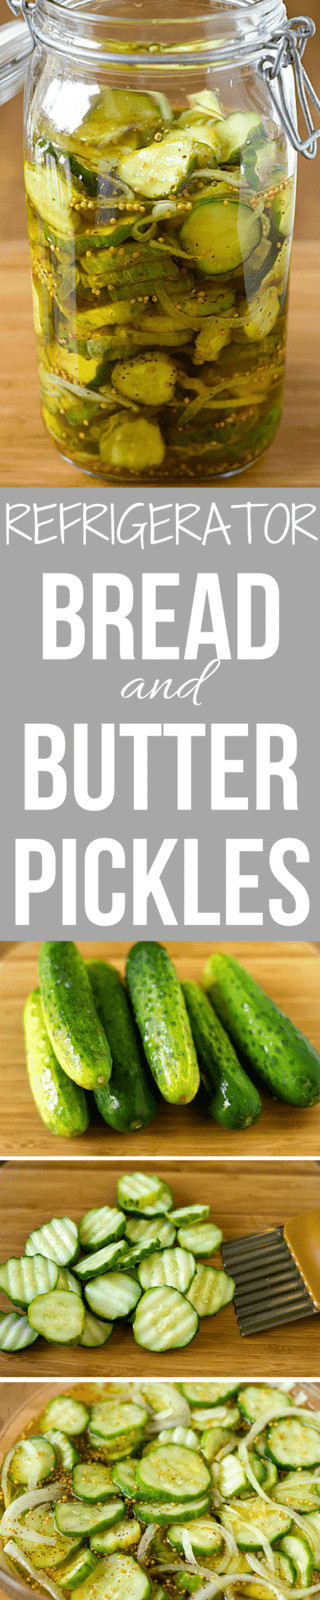 Bread And Butter Pickles Recipe No Canning
 Refrigerator Bread and Butter Pickles